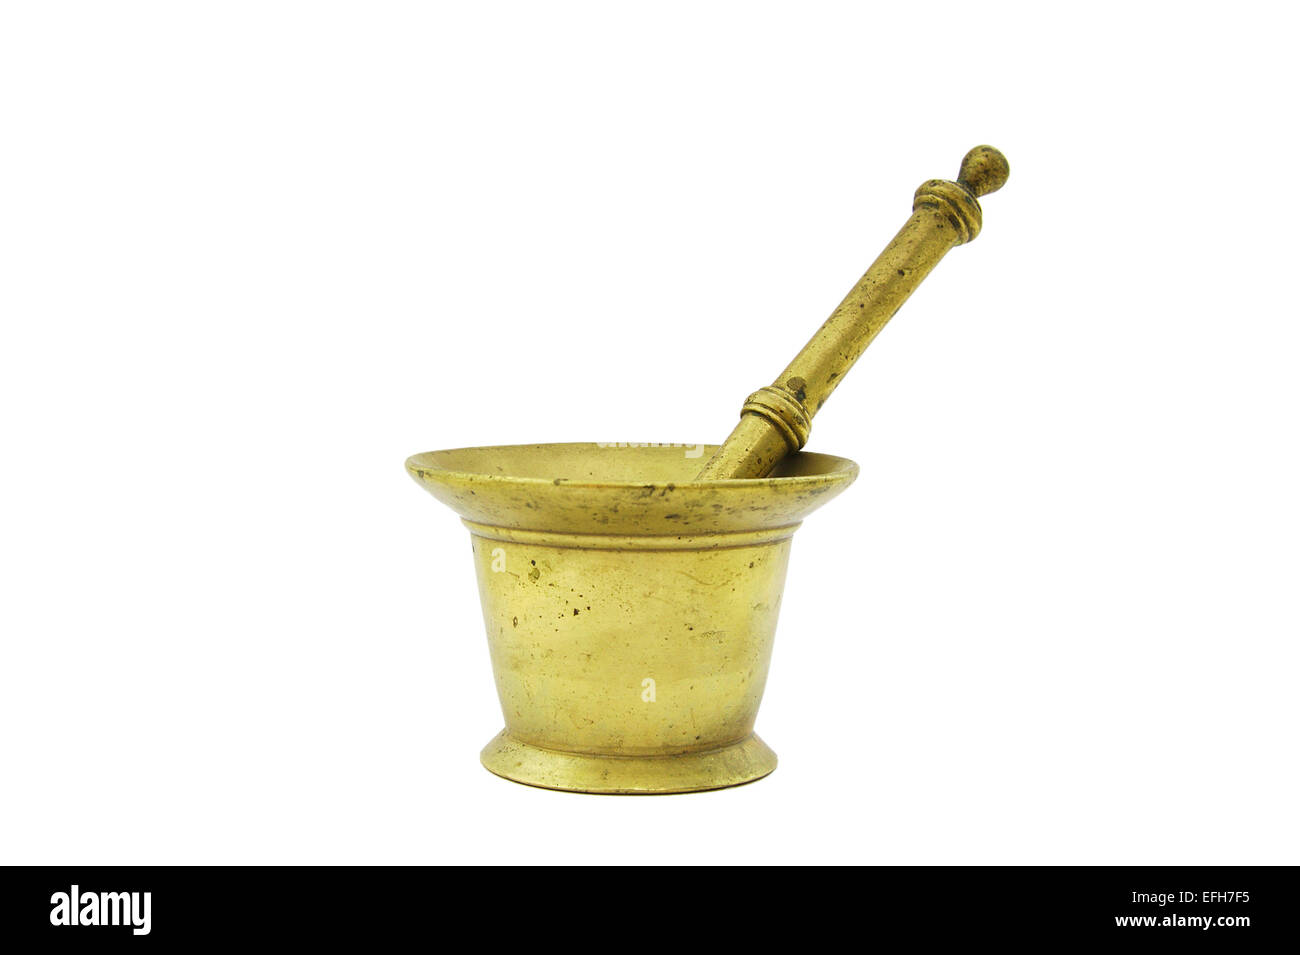 Old bronze mortar and pestle isolated on white background Stock Photo